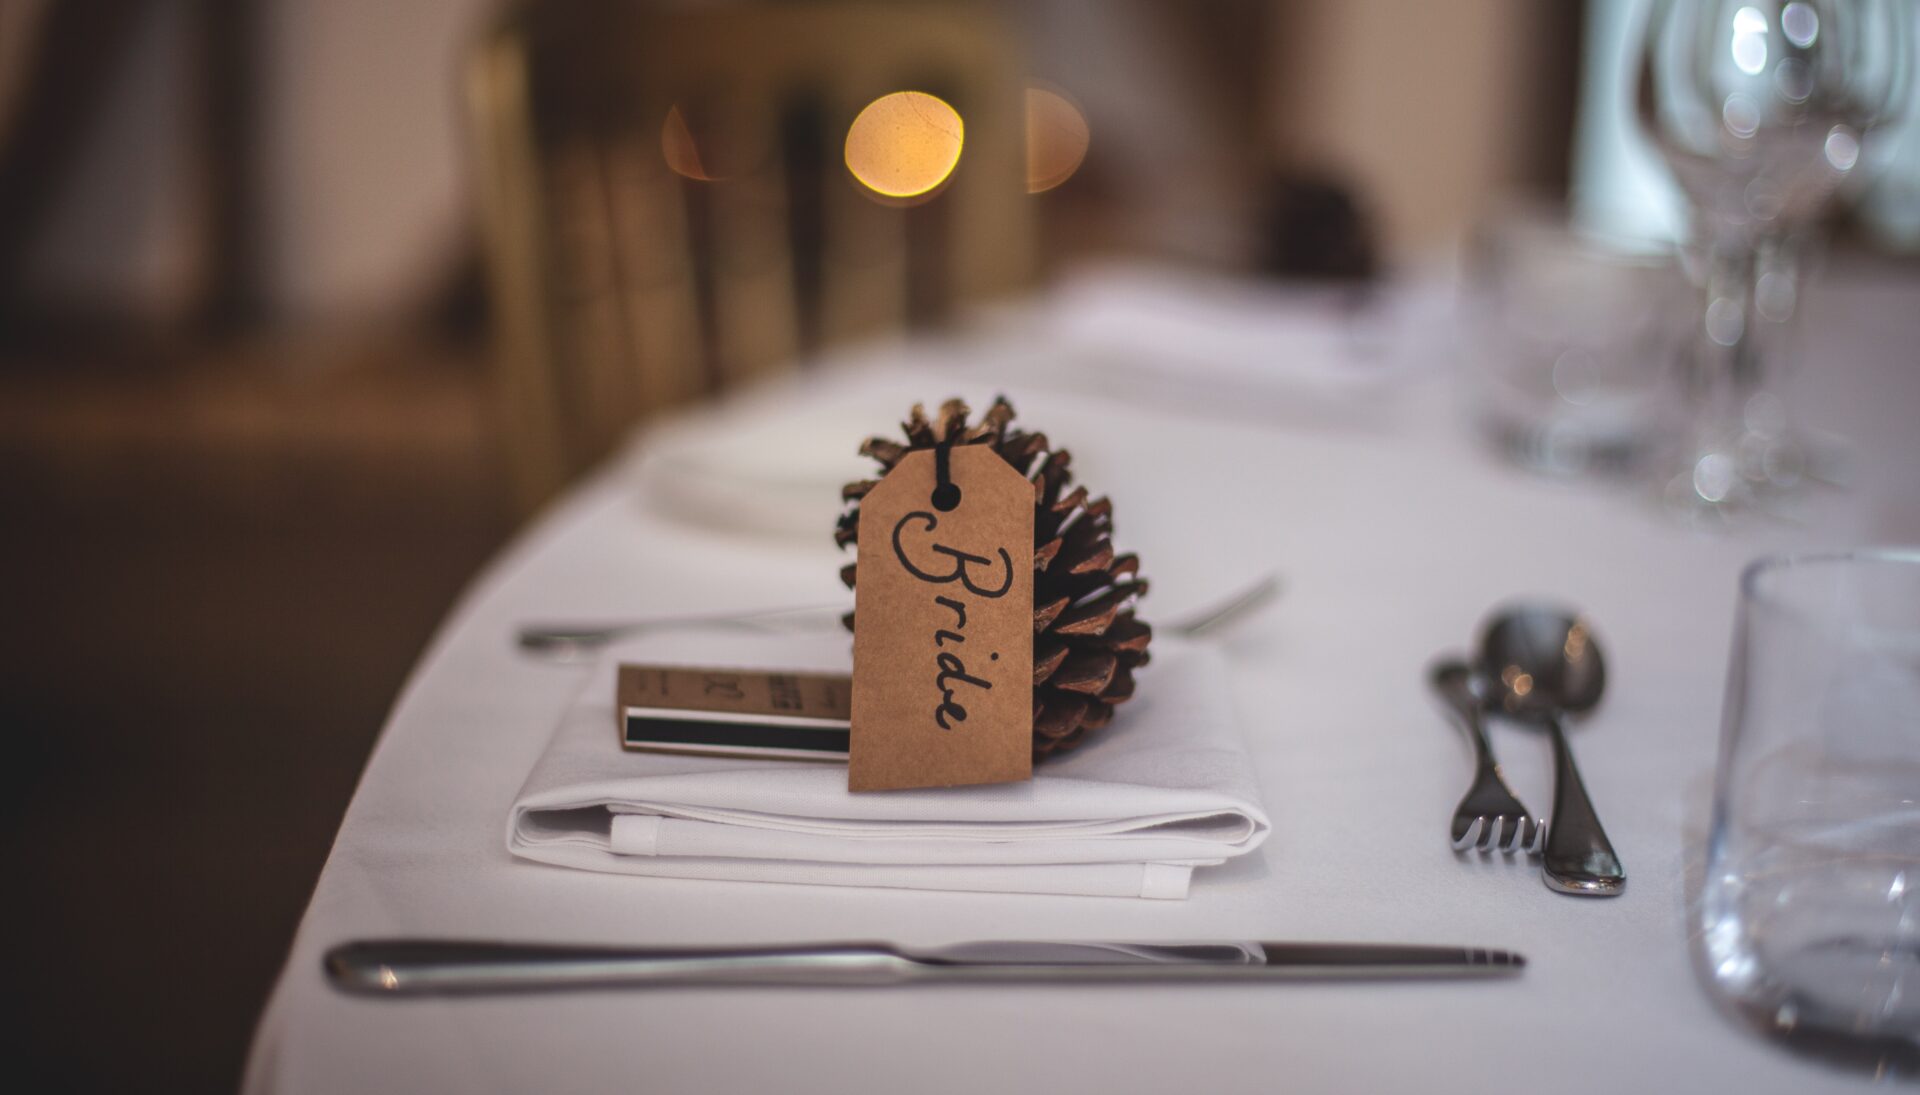 Wedding table with "Bride" name tag